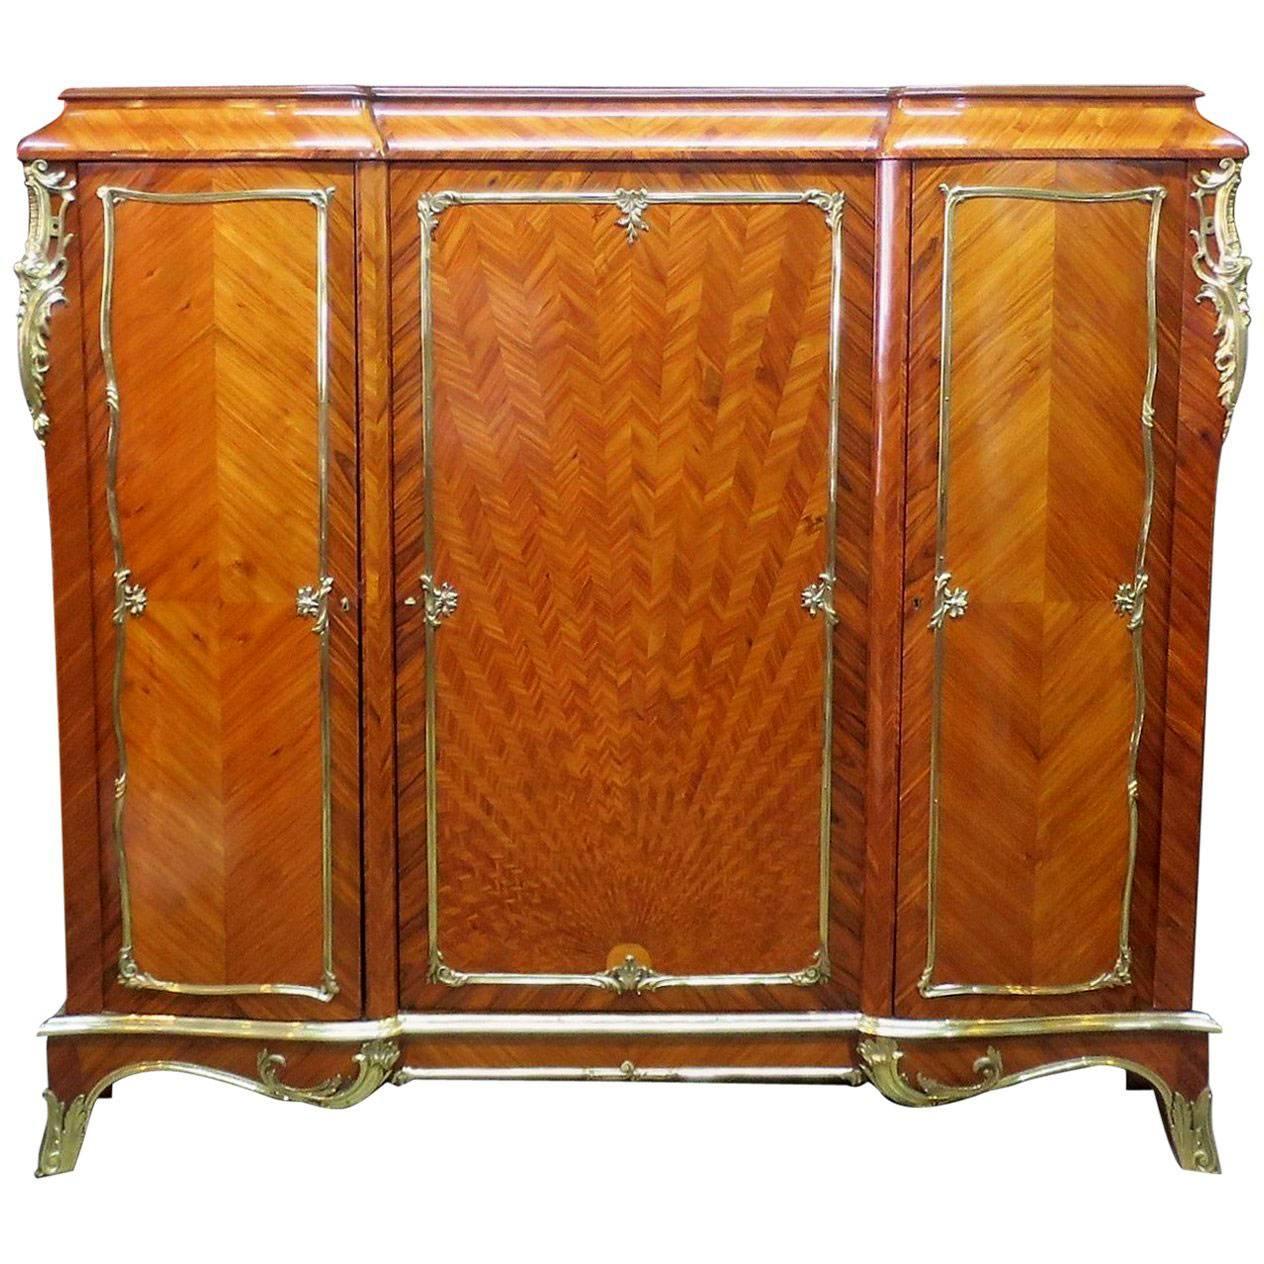 Rosewood Cabinet Attributed to Millet Sunbeam Veneer St LXV Bronze Accents